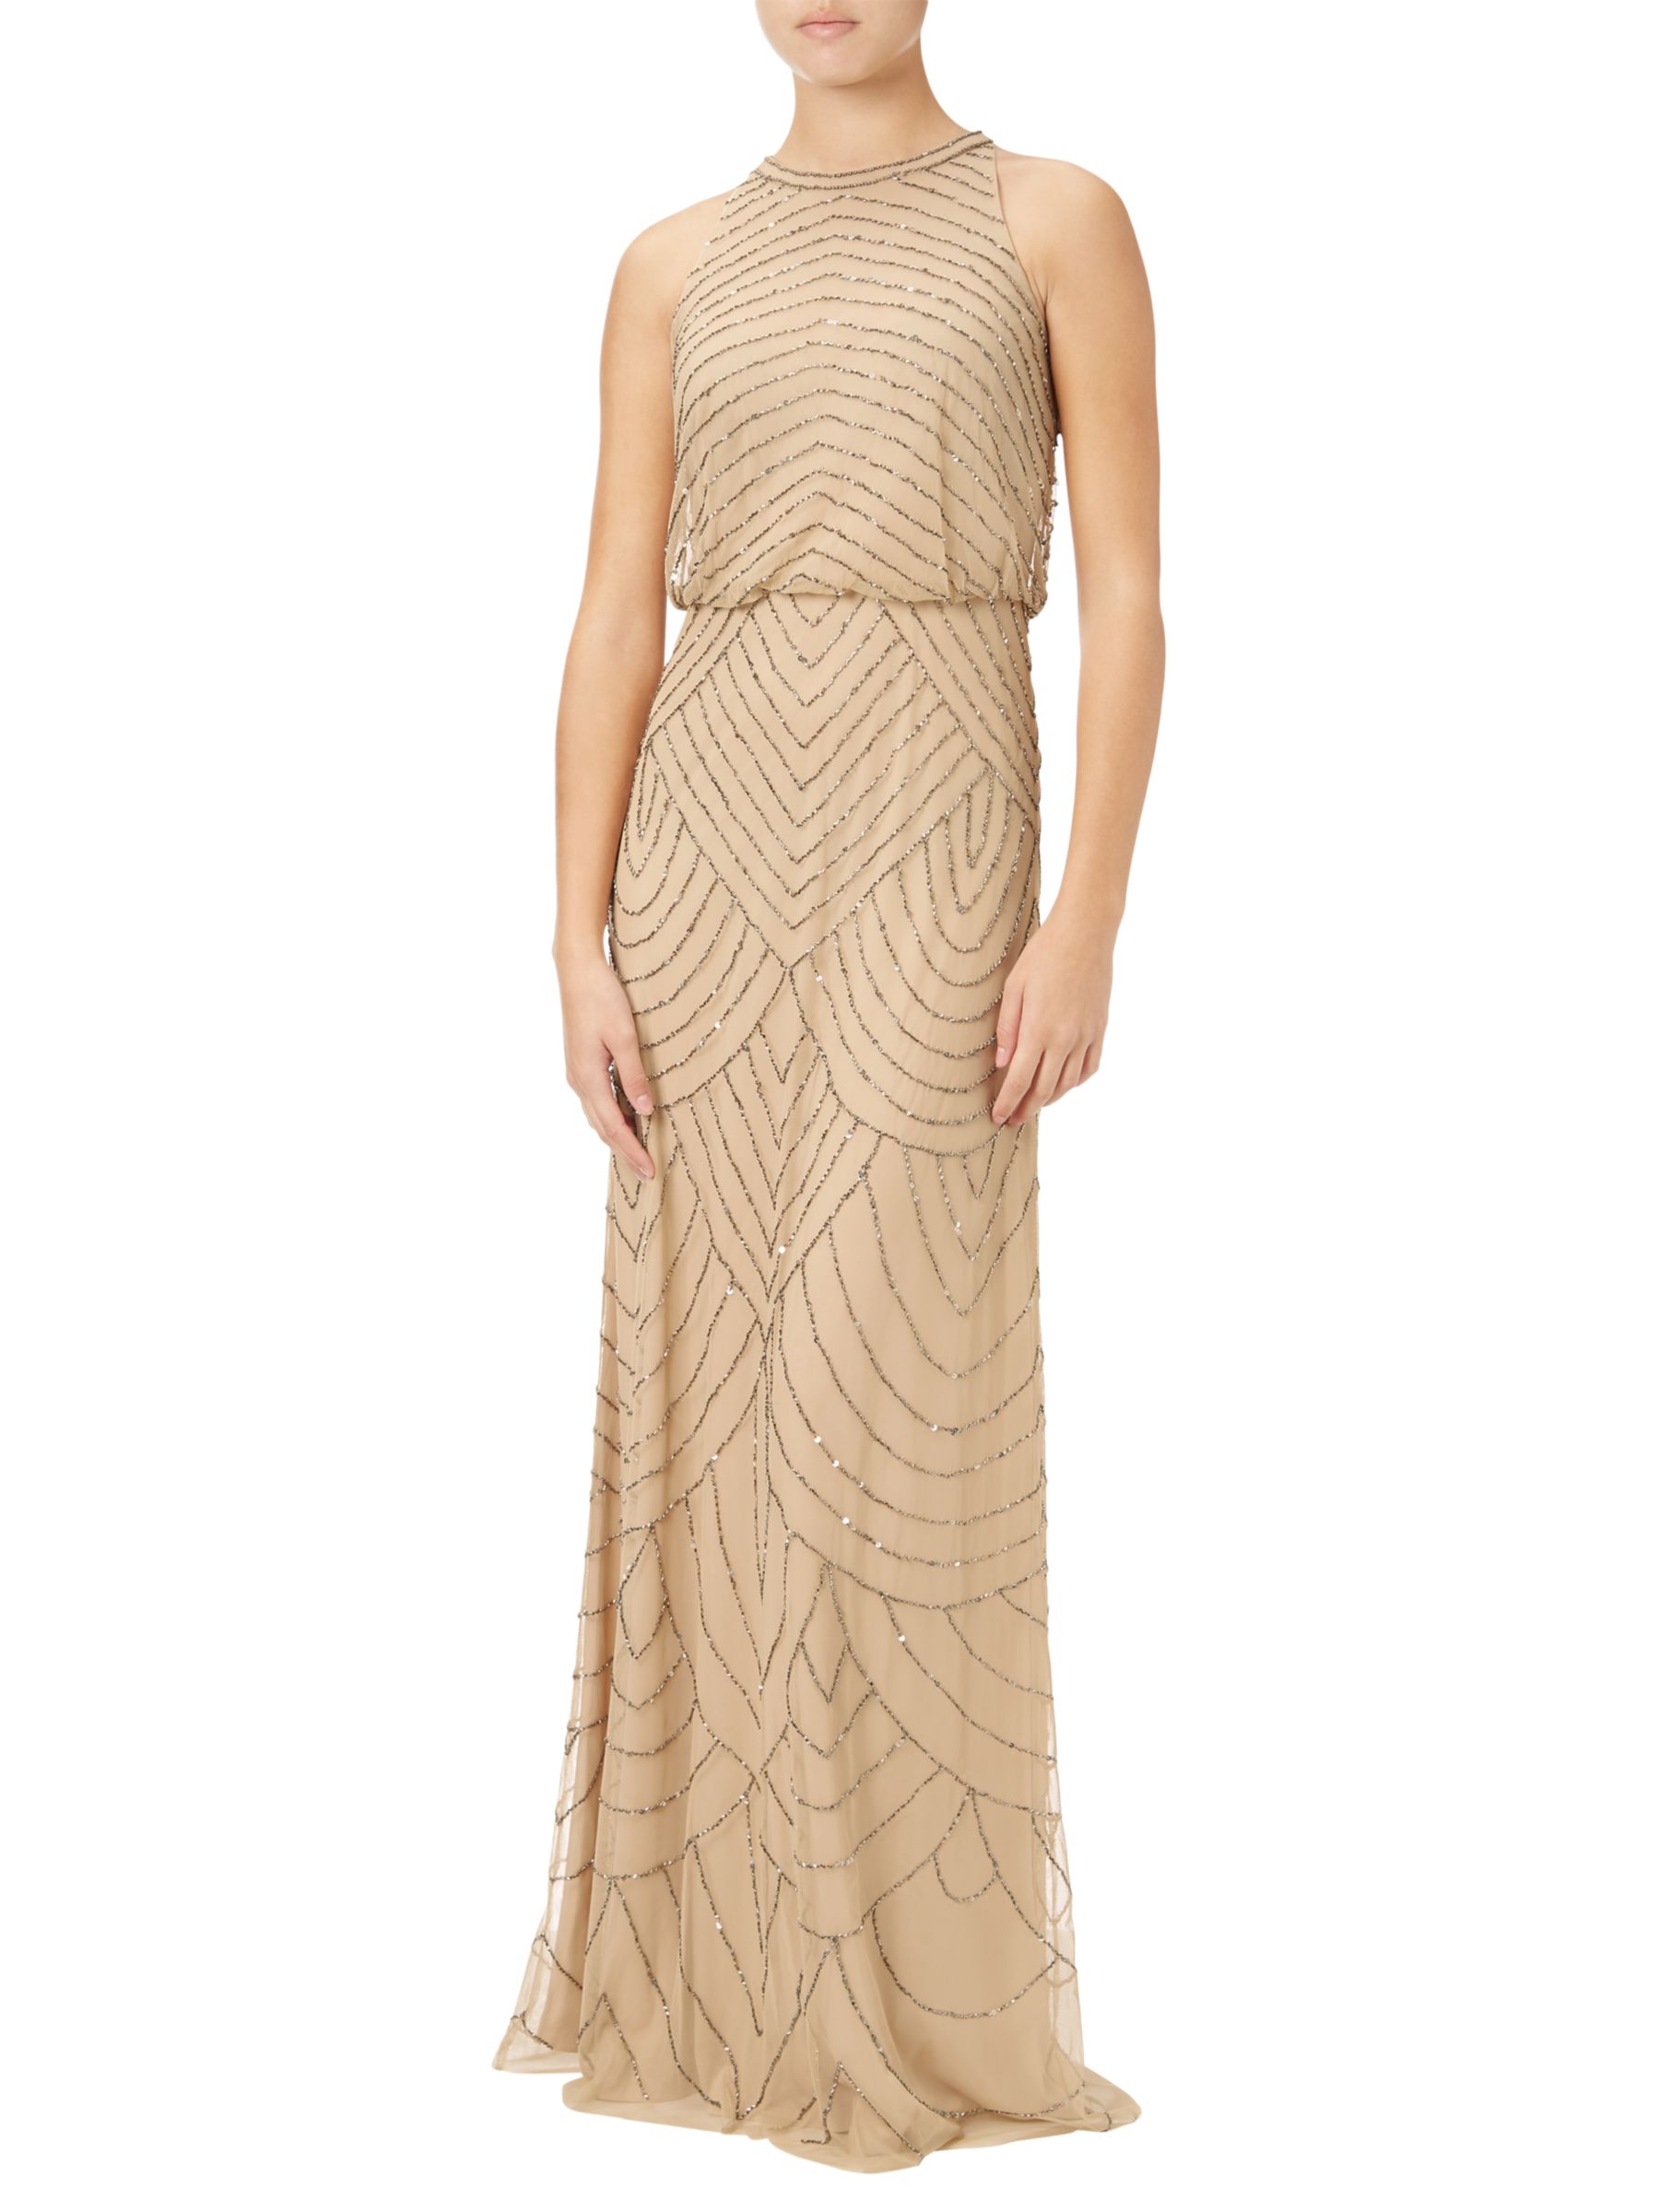 Adrianna Papell Sleeveless Beaded Gown, Nude at John Lewis & Partners